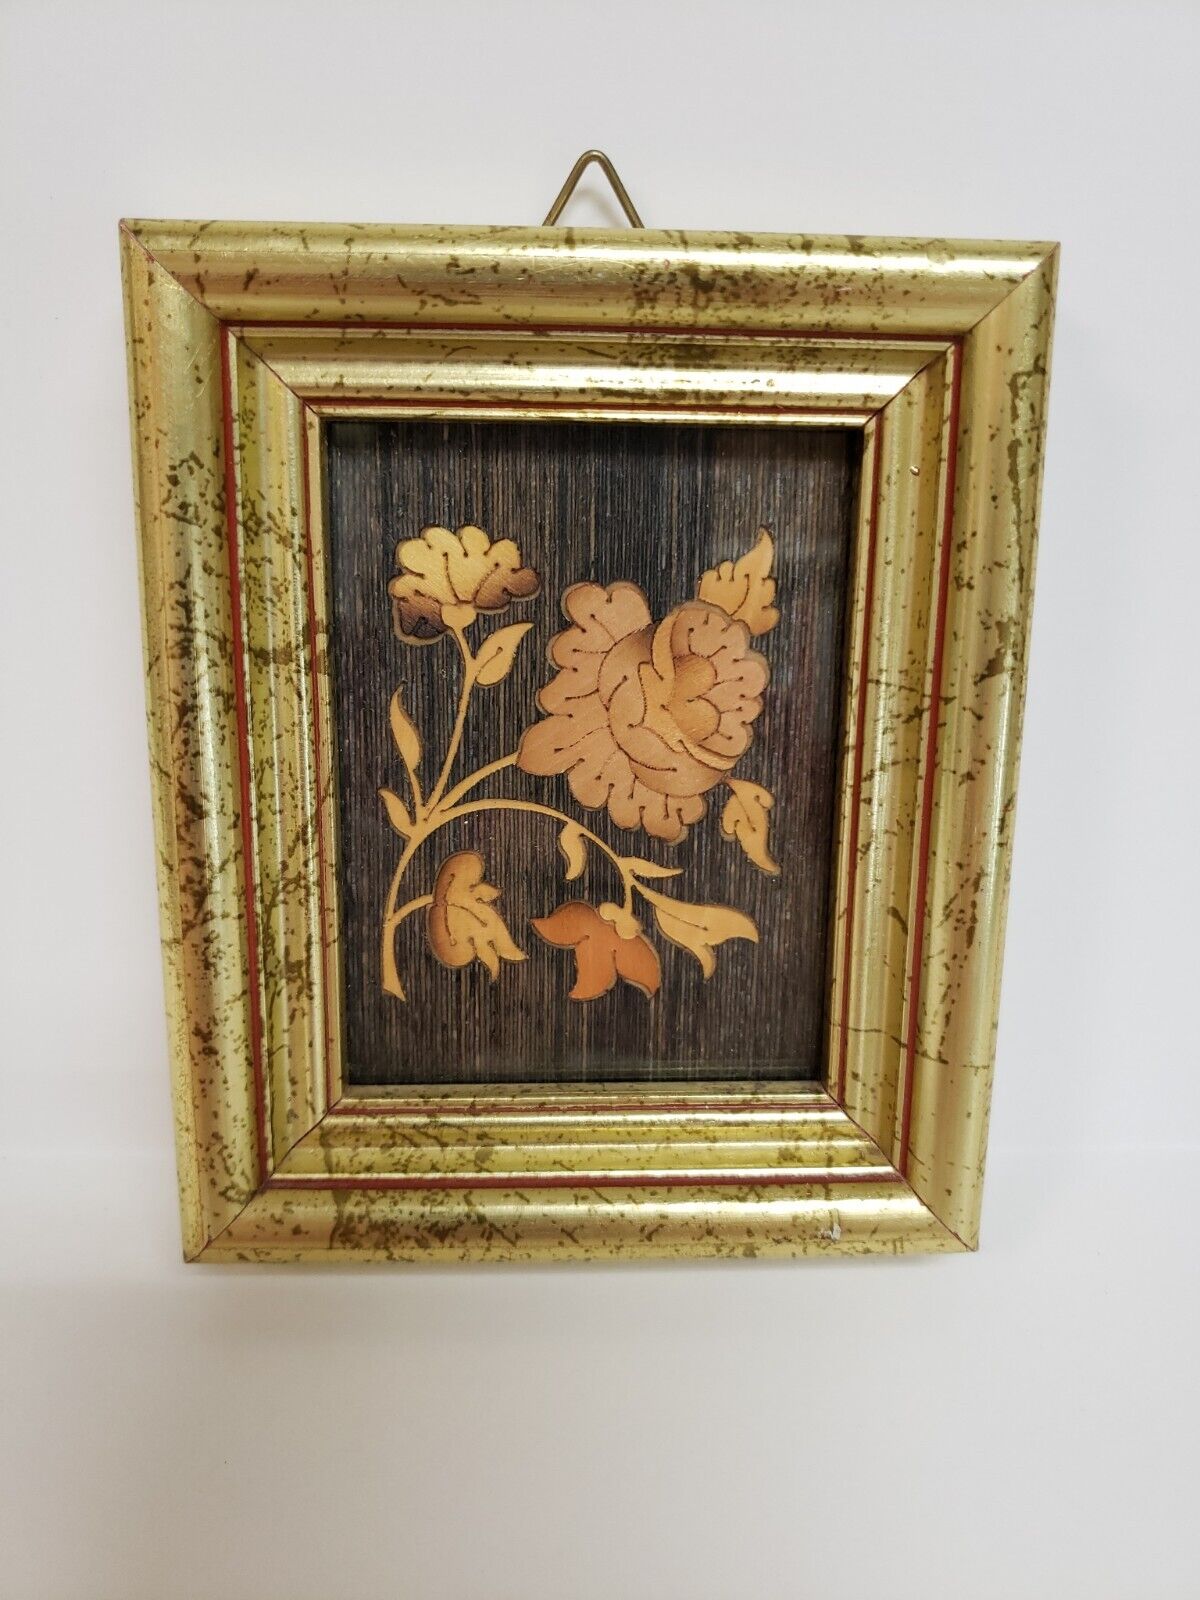 Vintage Italian Inlaid Wood Flower Picture Italy w/ Tag On Back Hand Made 5x4 